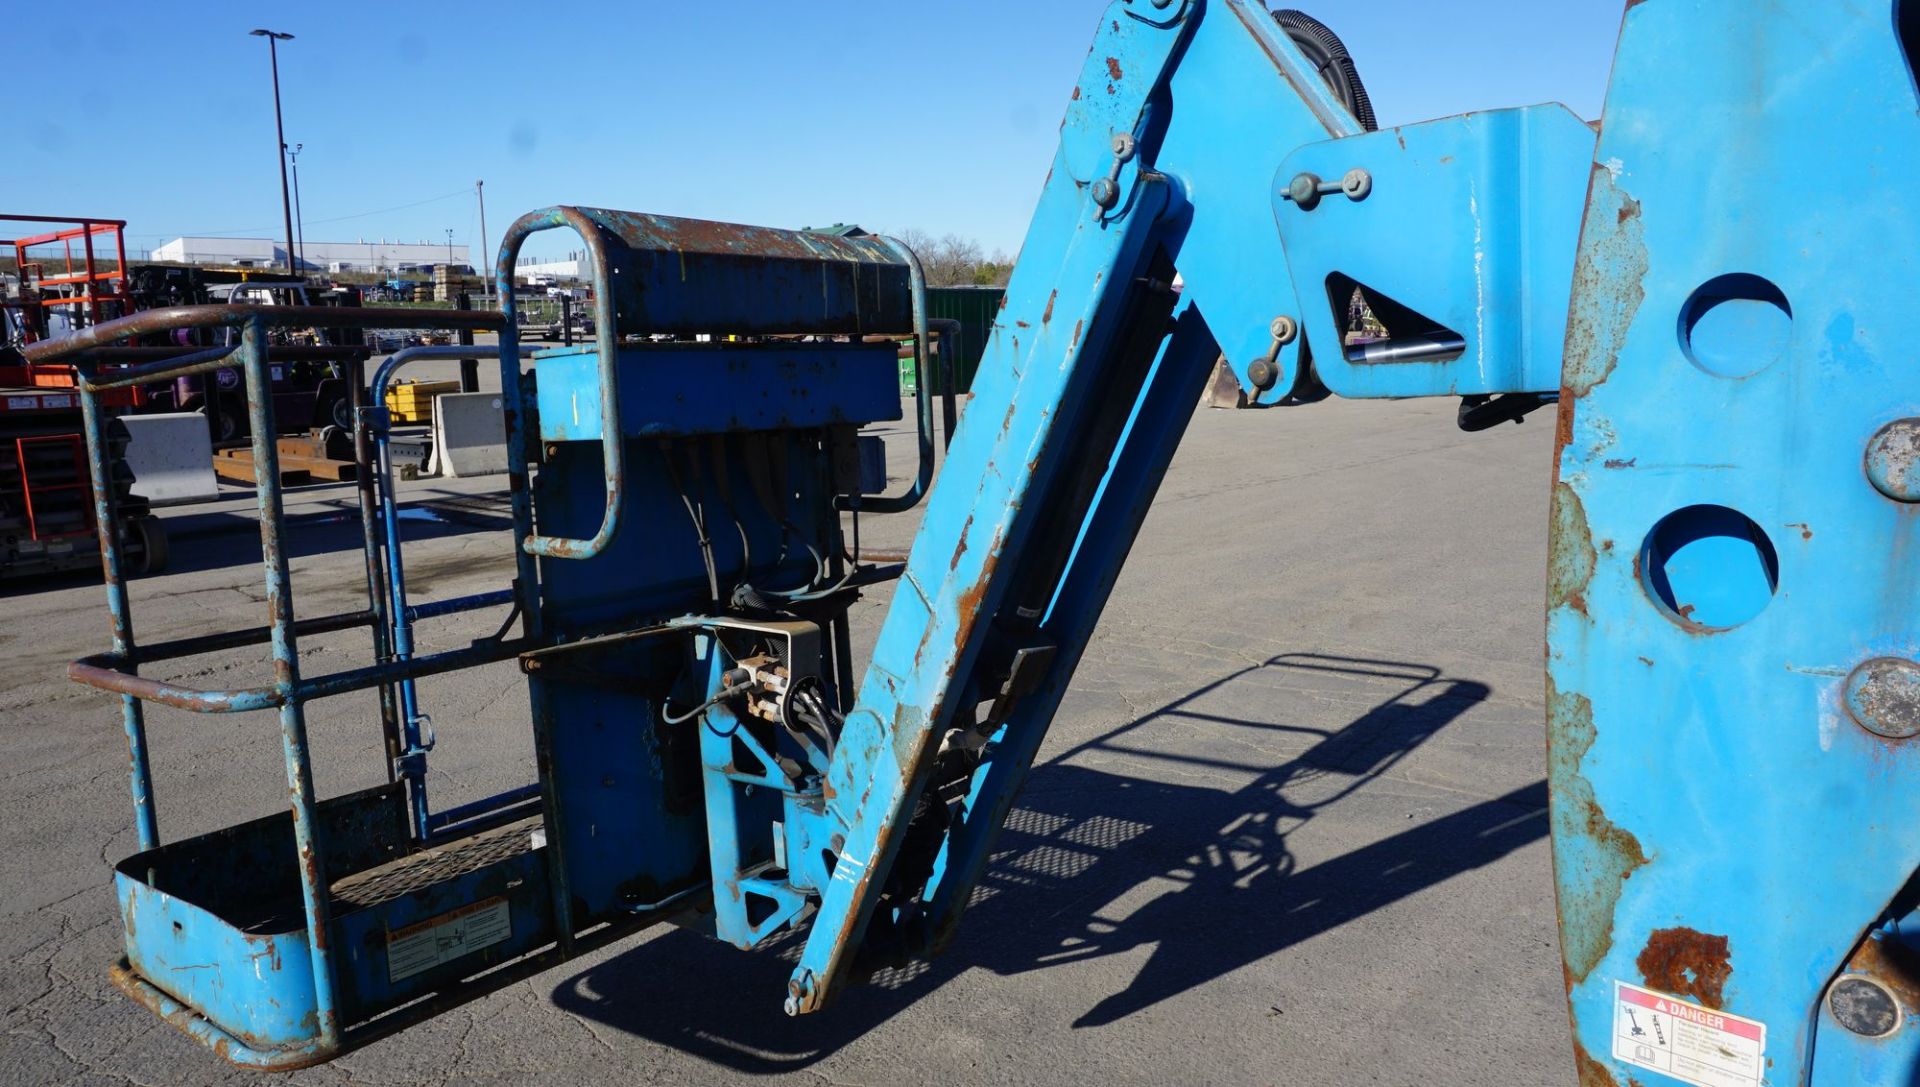 2007 GENIE MODEL Z-45/25 BATTERY POWERED ARTICULATING BOOM LIFT, 45' MAX PLATFORM HEIGHT - 51' - Image 6 of 8